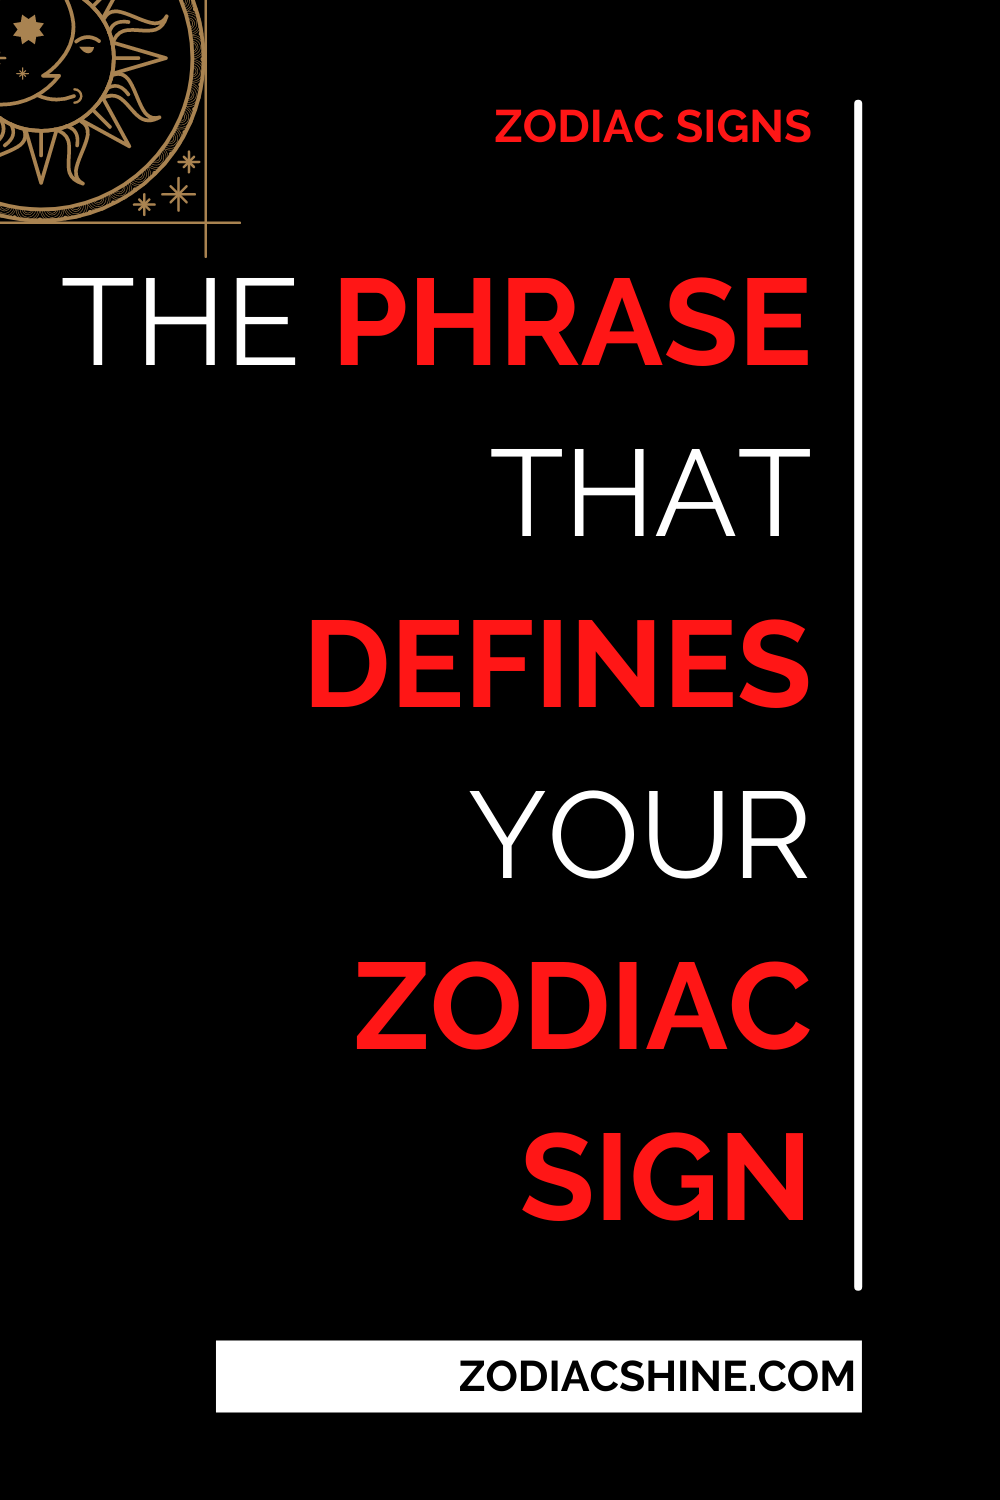 The Phrase That Defines Your Zodiac Sign